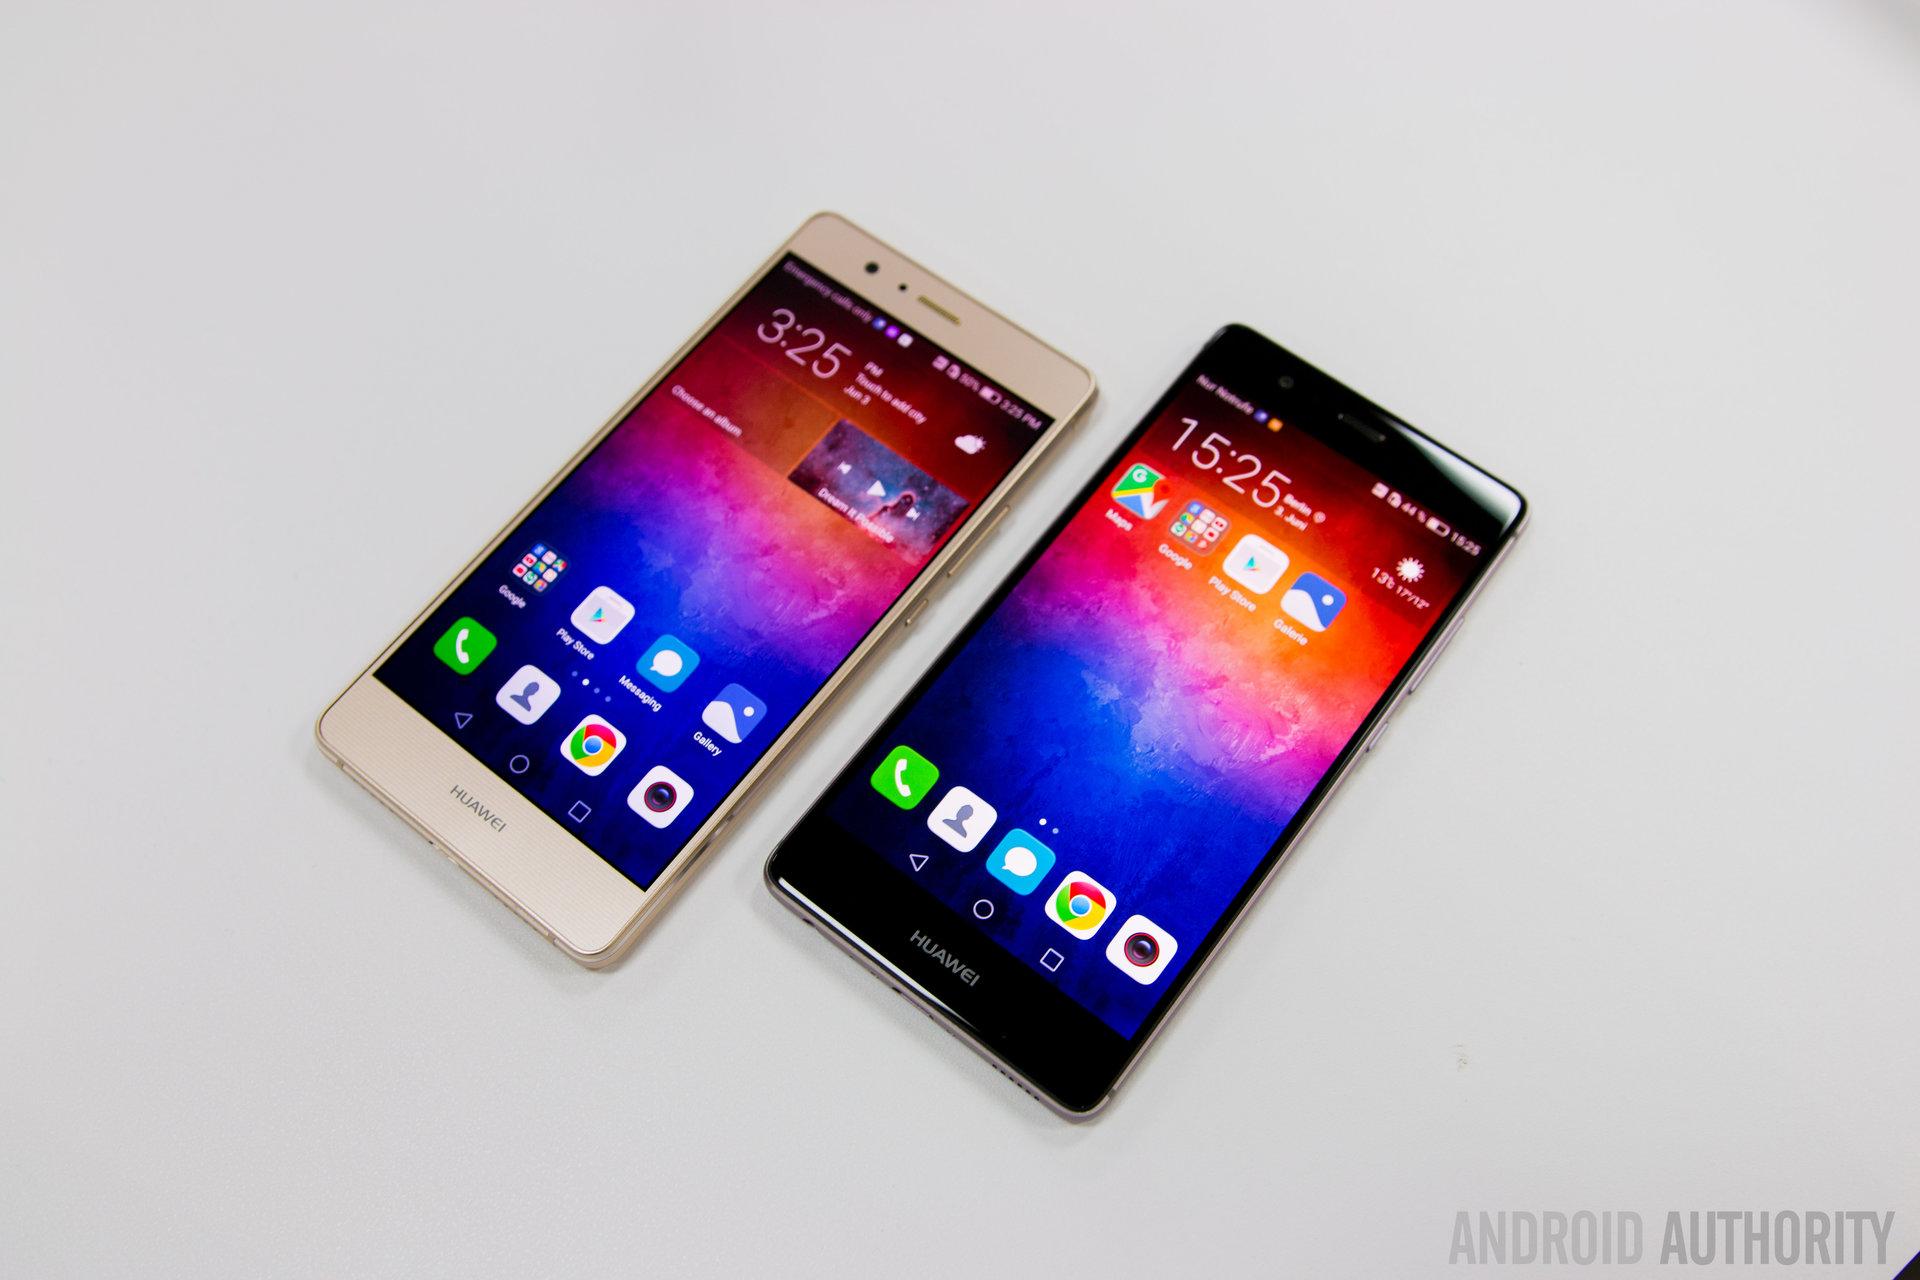 HUAWEI P9 vs HUAWEI P9 quick look Android